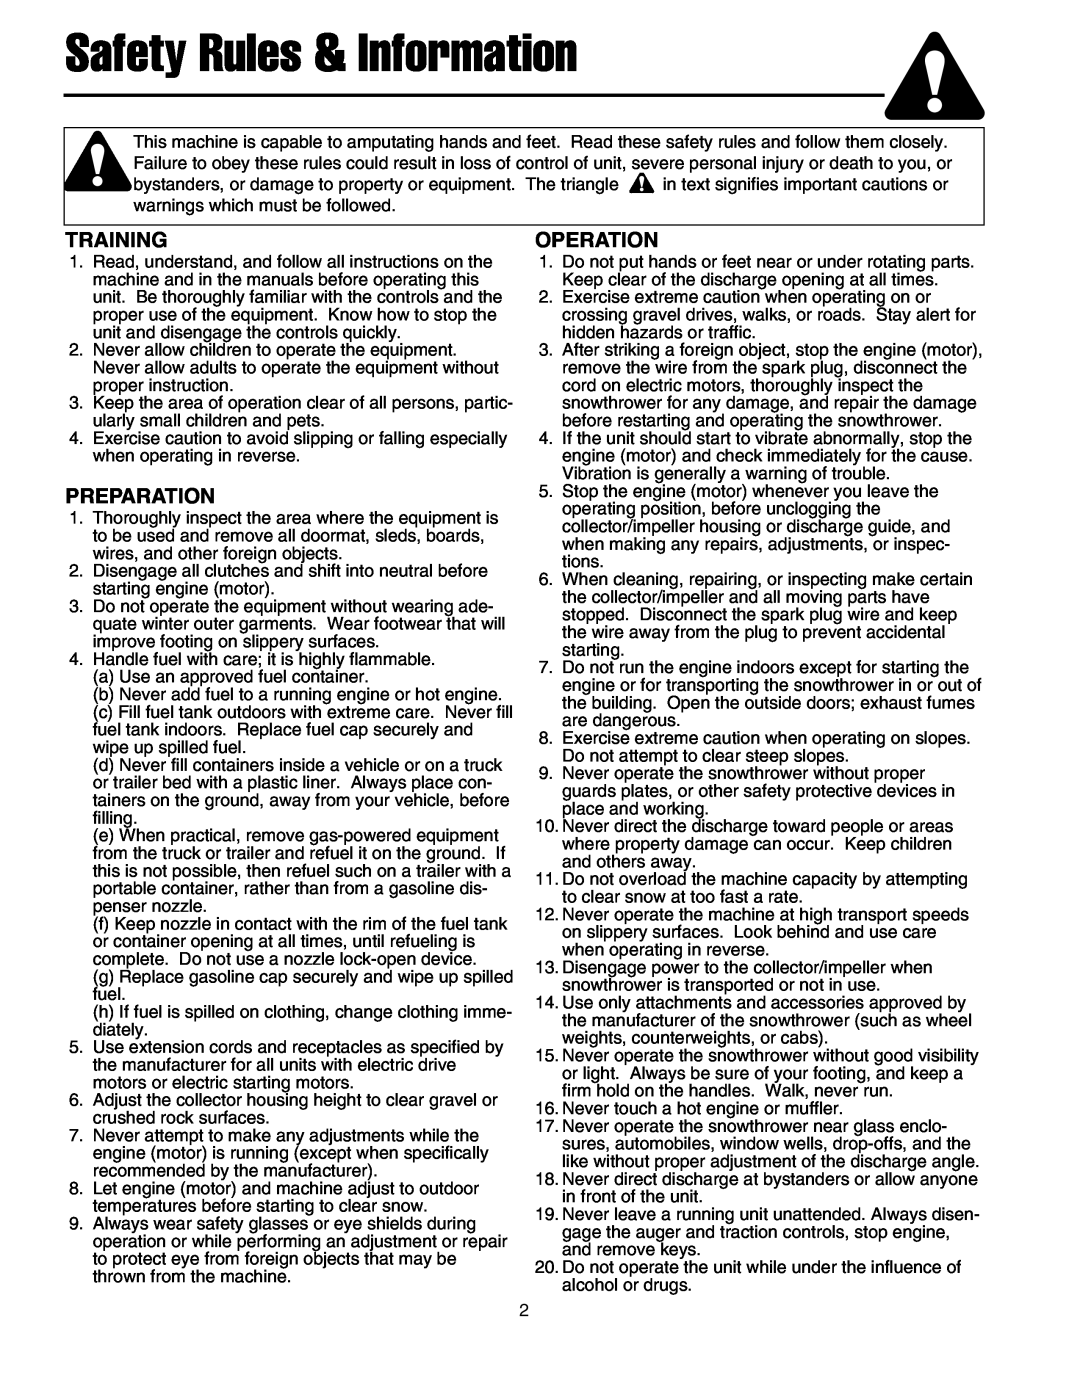 Simplicity 1694584 319E, 1694583 319M instruction sheet Safety Rules & Information, Training, Preparation, Operation 